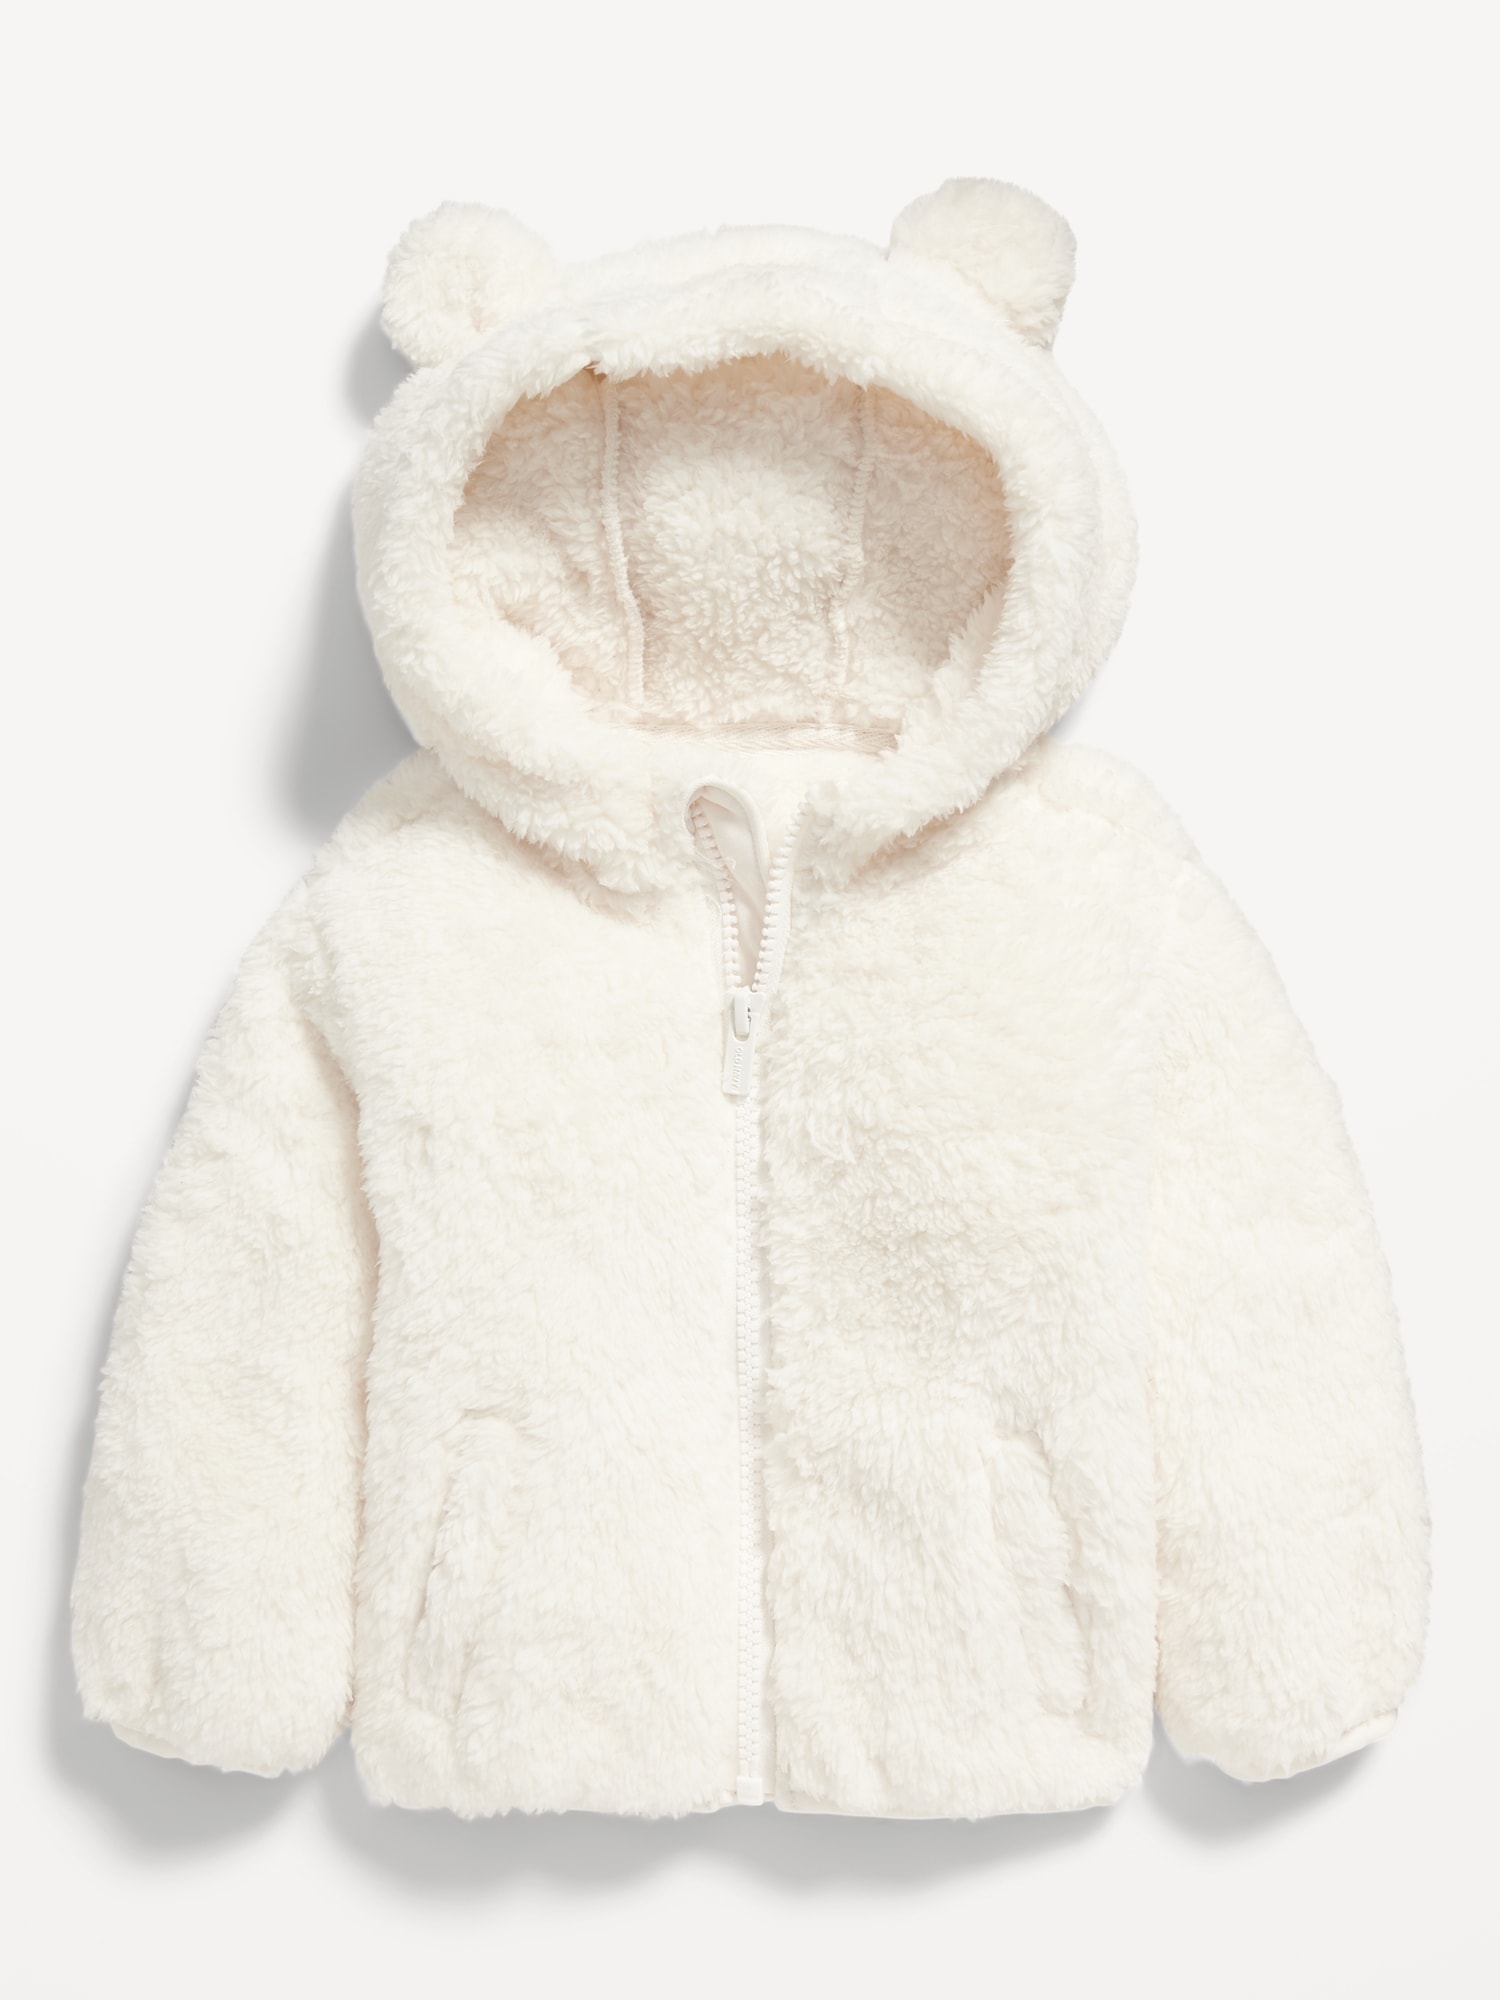 Unisex Sherpa Critter Zip-Front Hooded Jacket for Baby